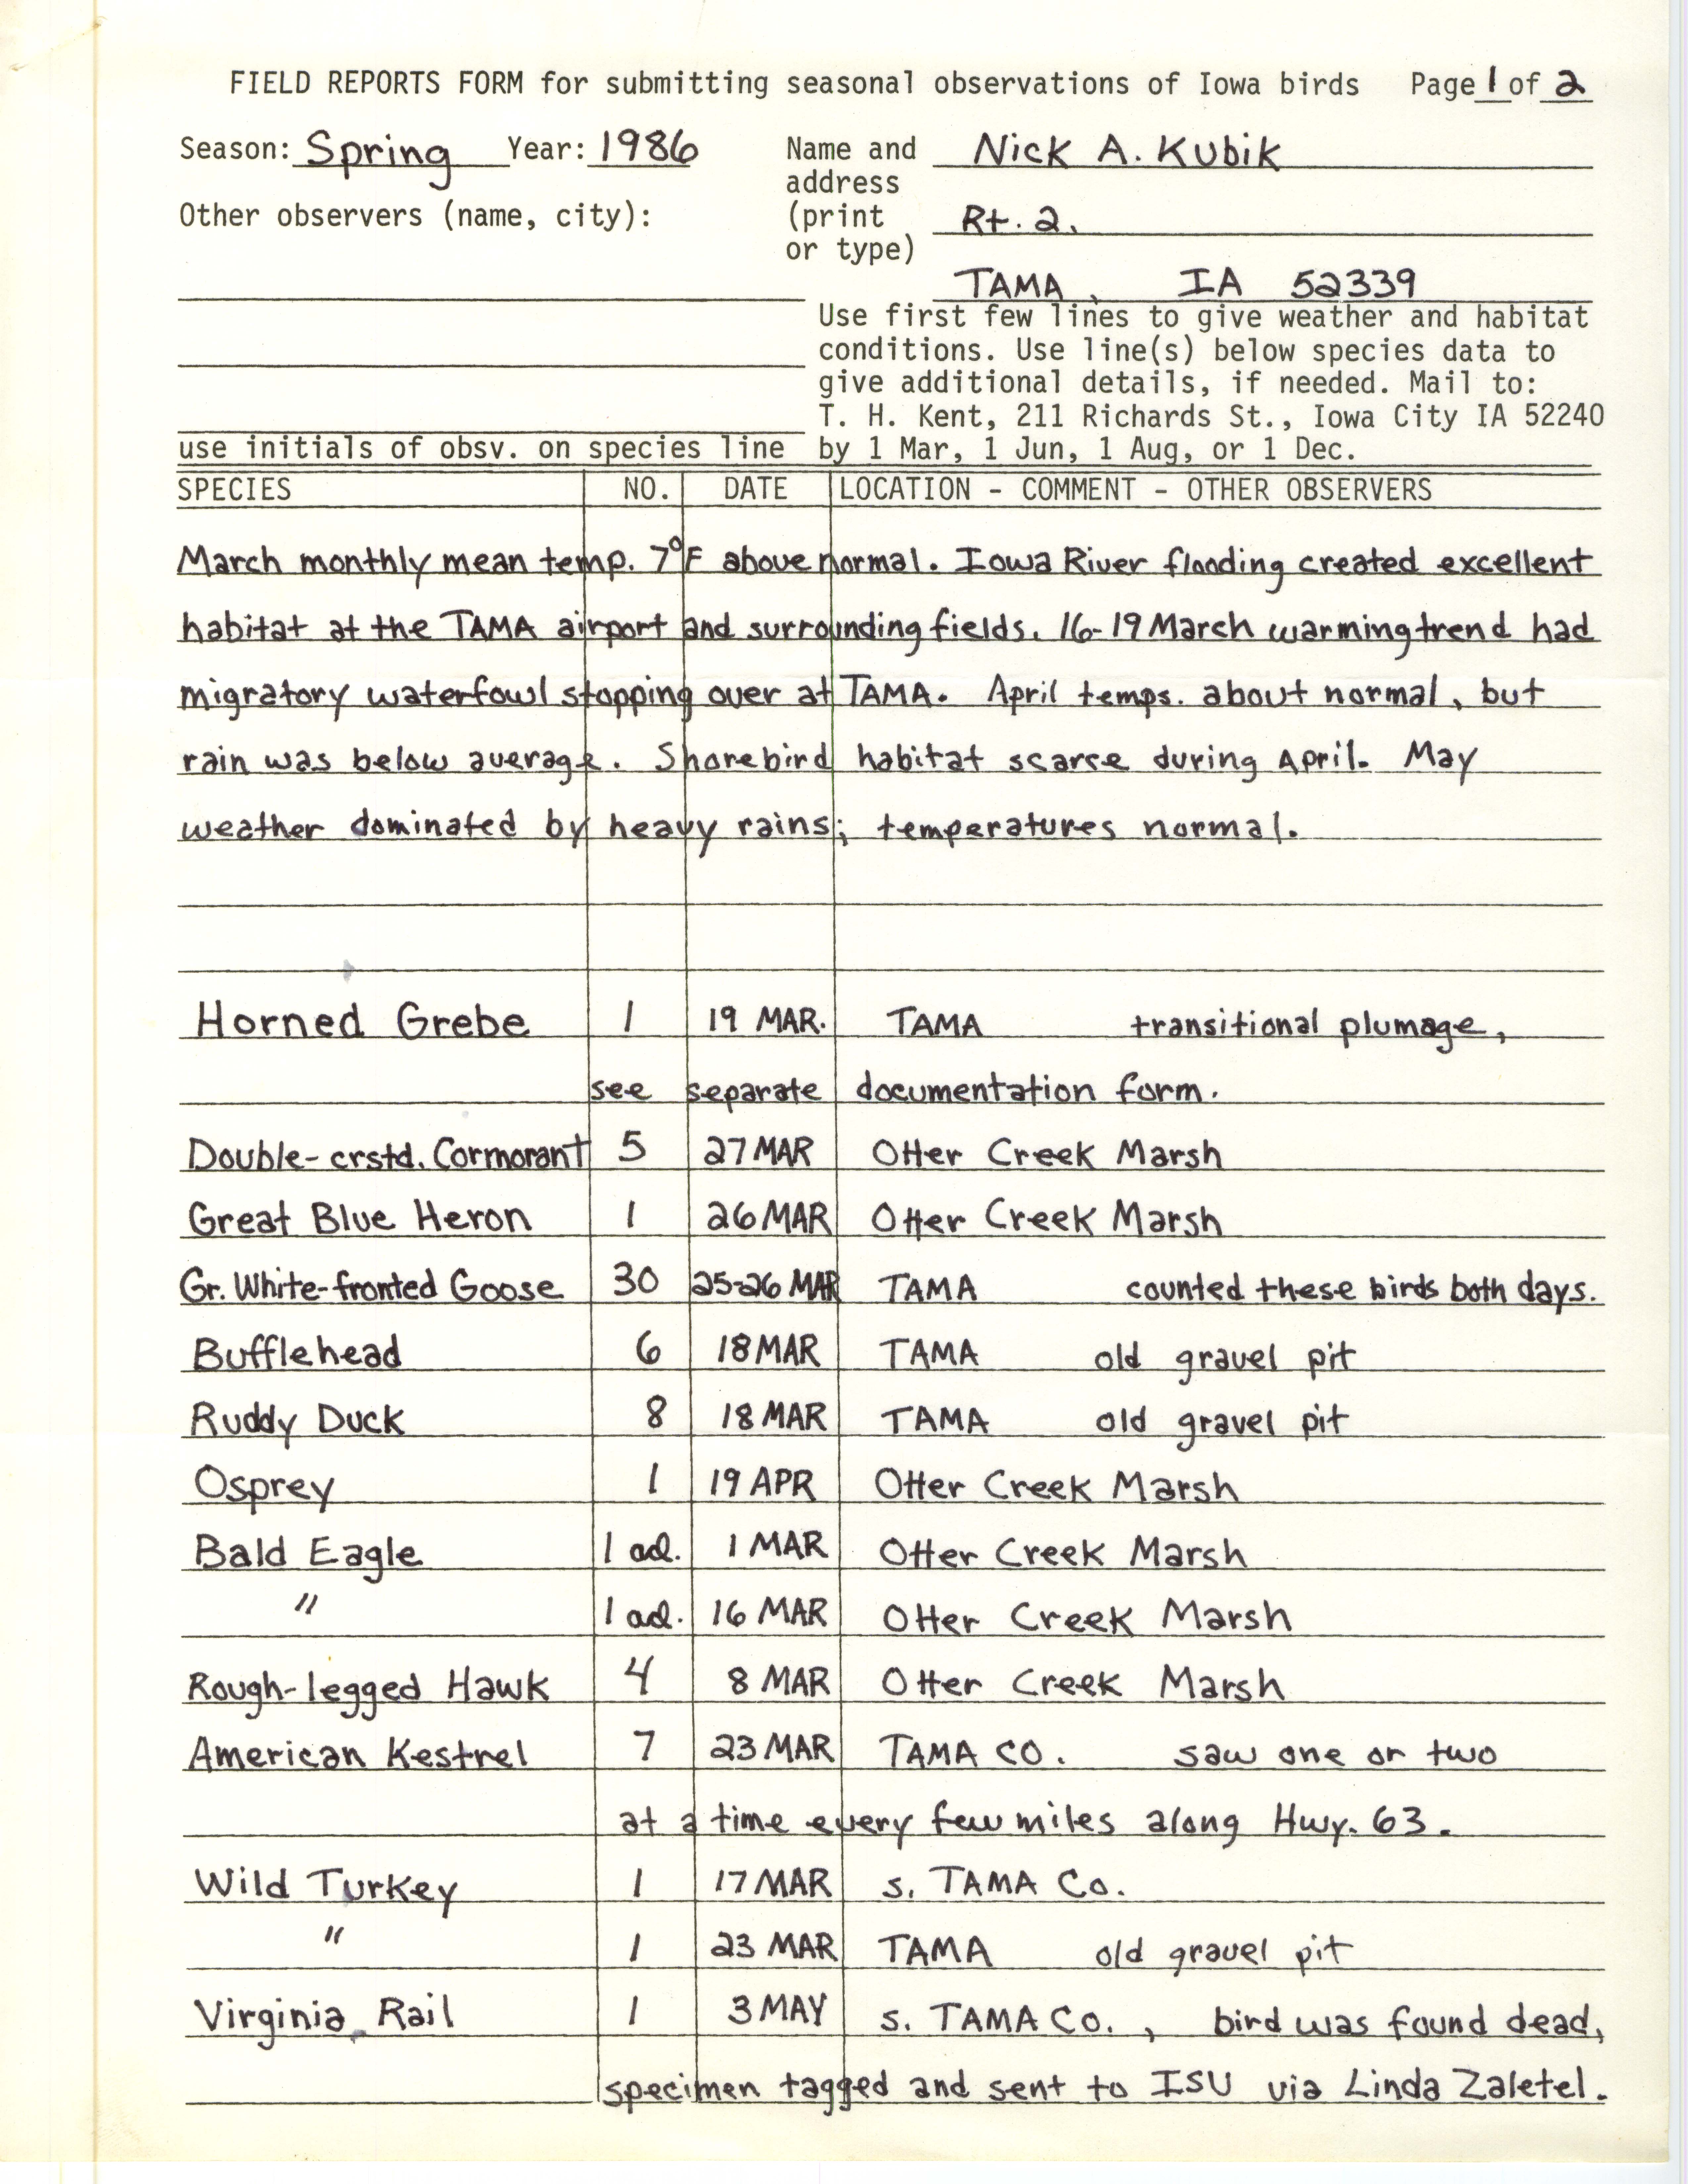 Field reports form for submitting seasonal observations of Iowa birds, Nick Kubik, Spring 1986